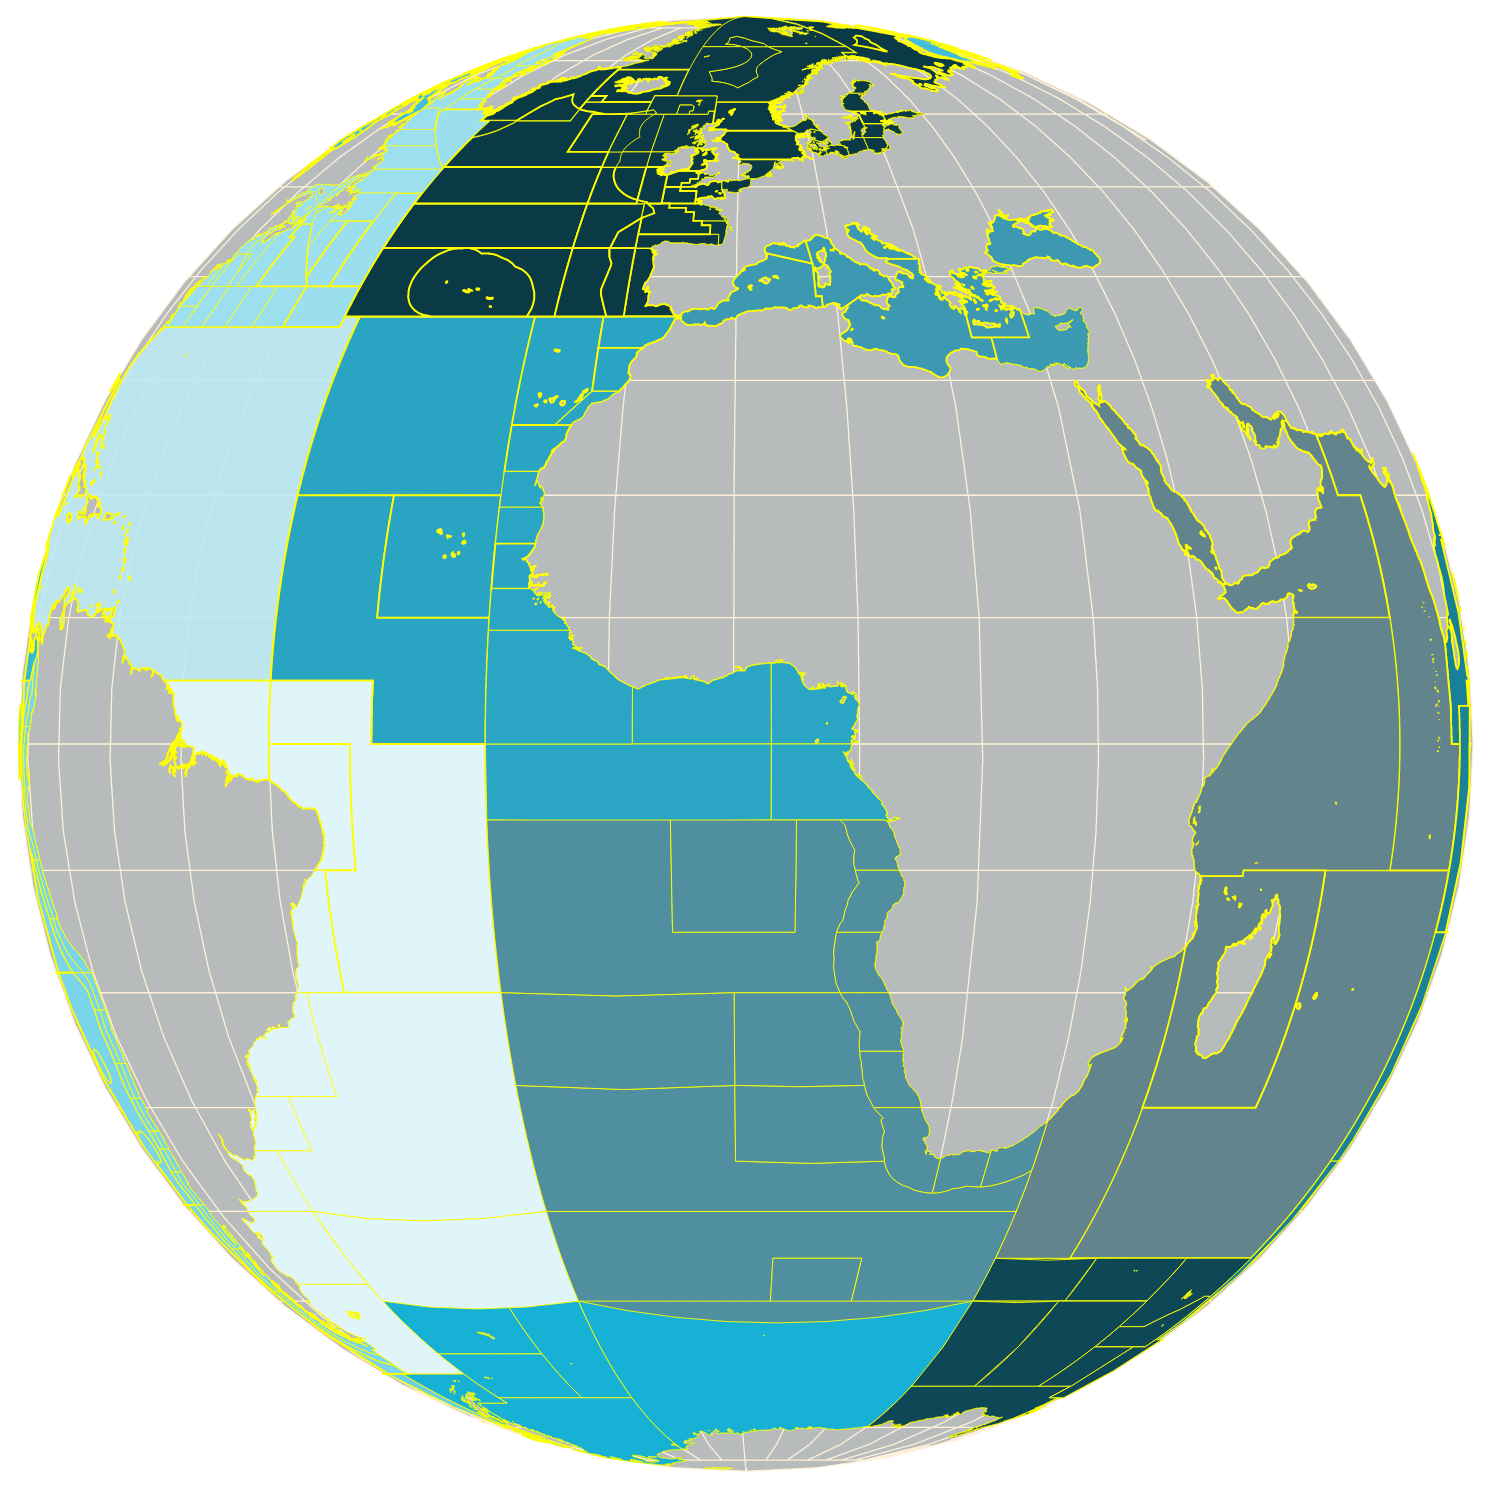 FAO Fishing Areas on a world map